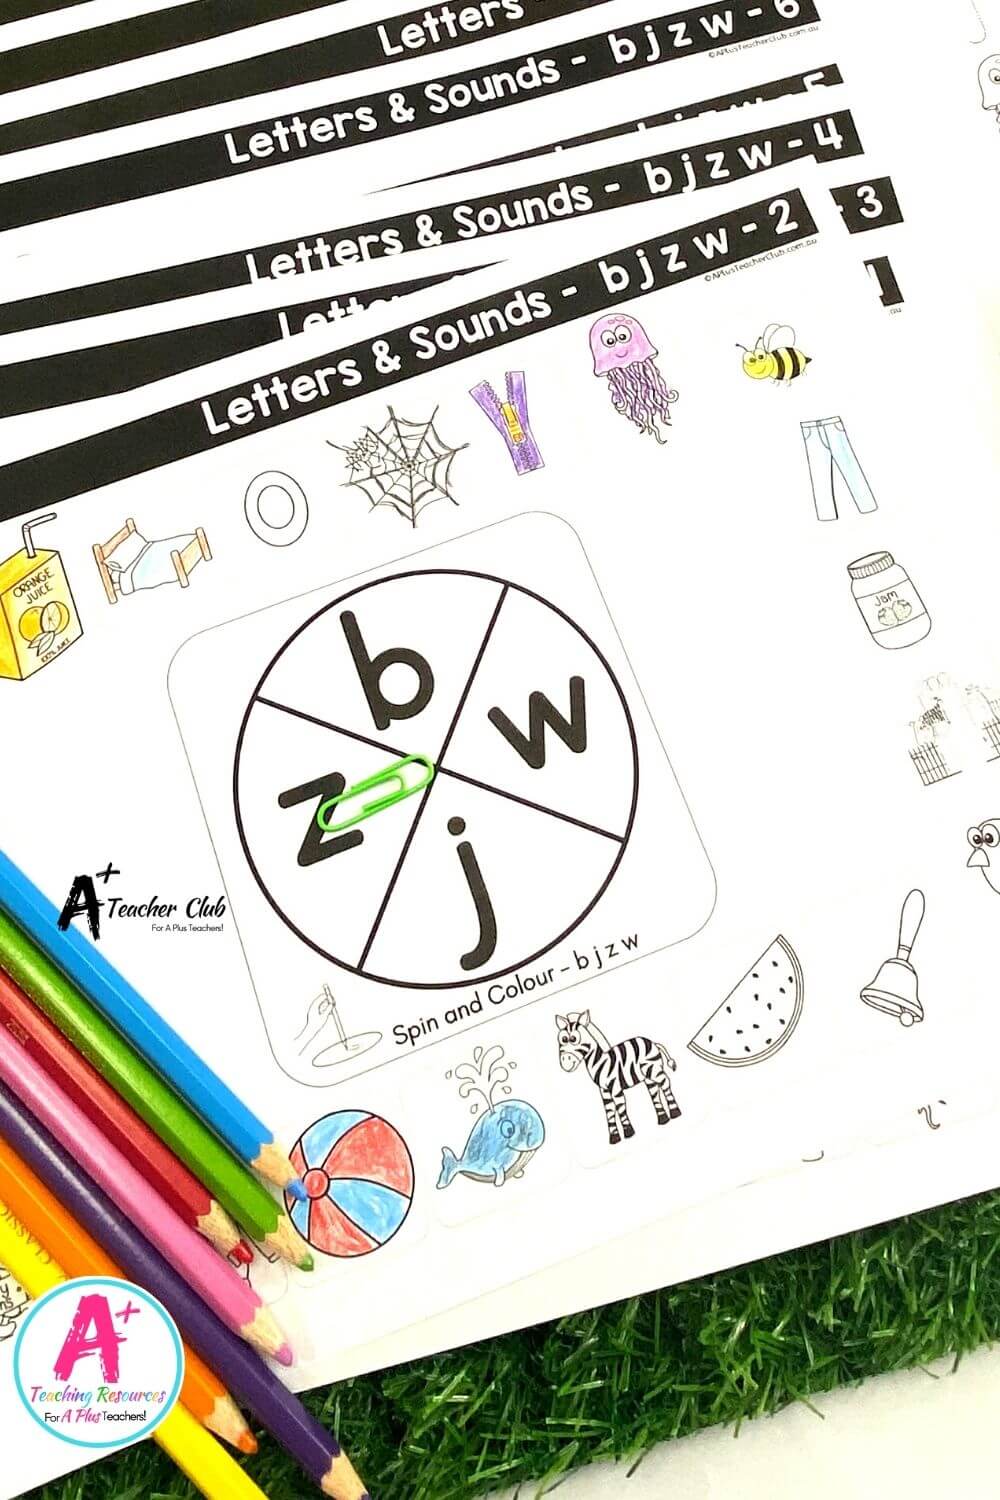 BJZW Spin & Colour Worksheets (B&W LOWER CASE)